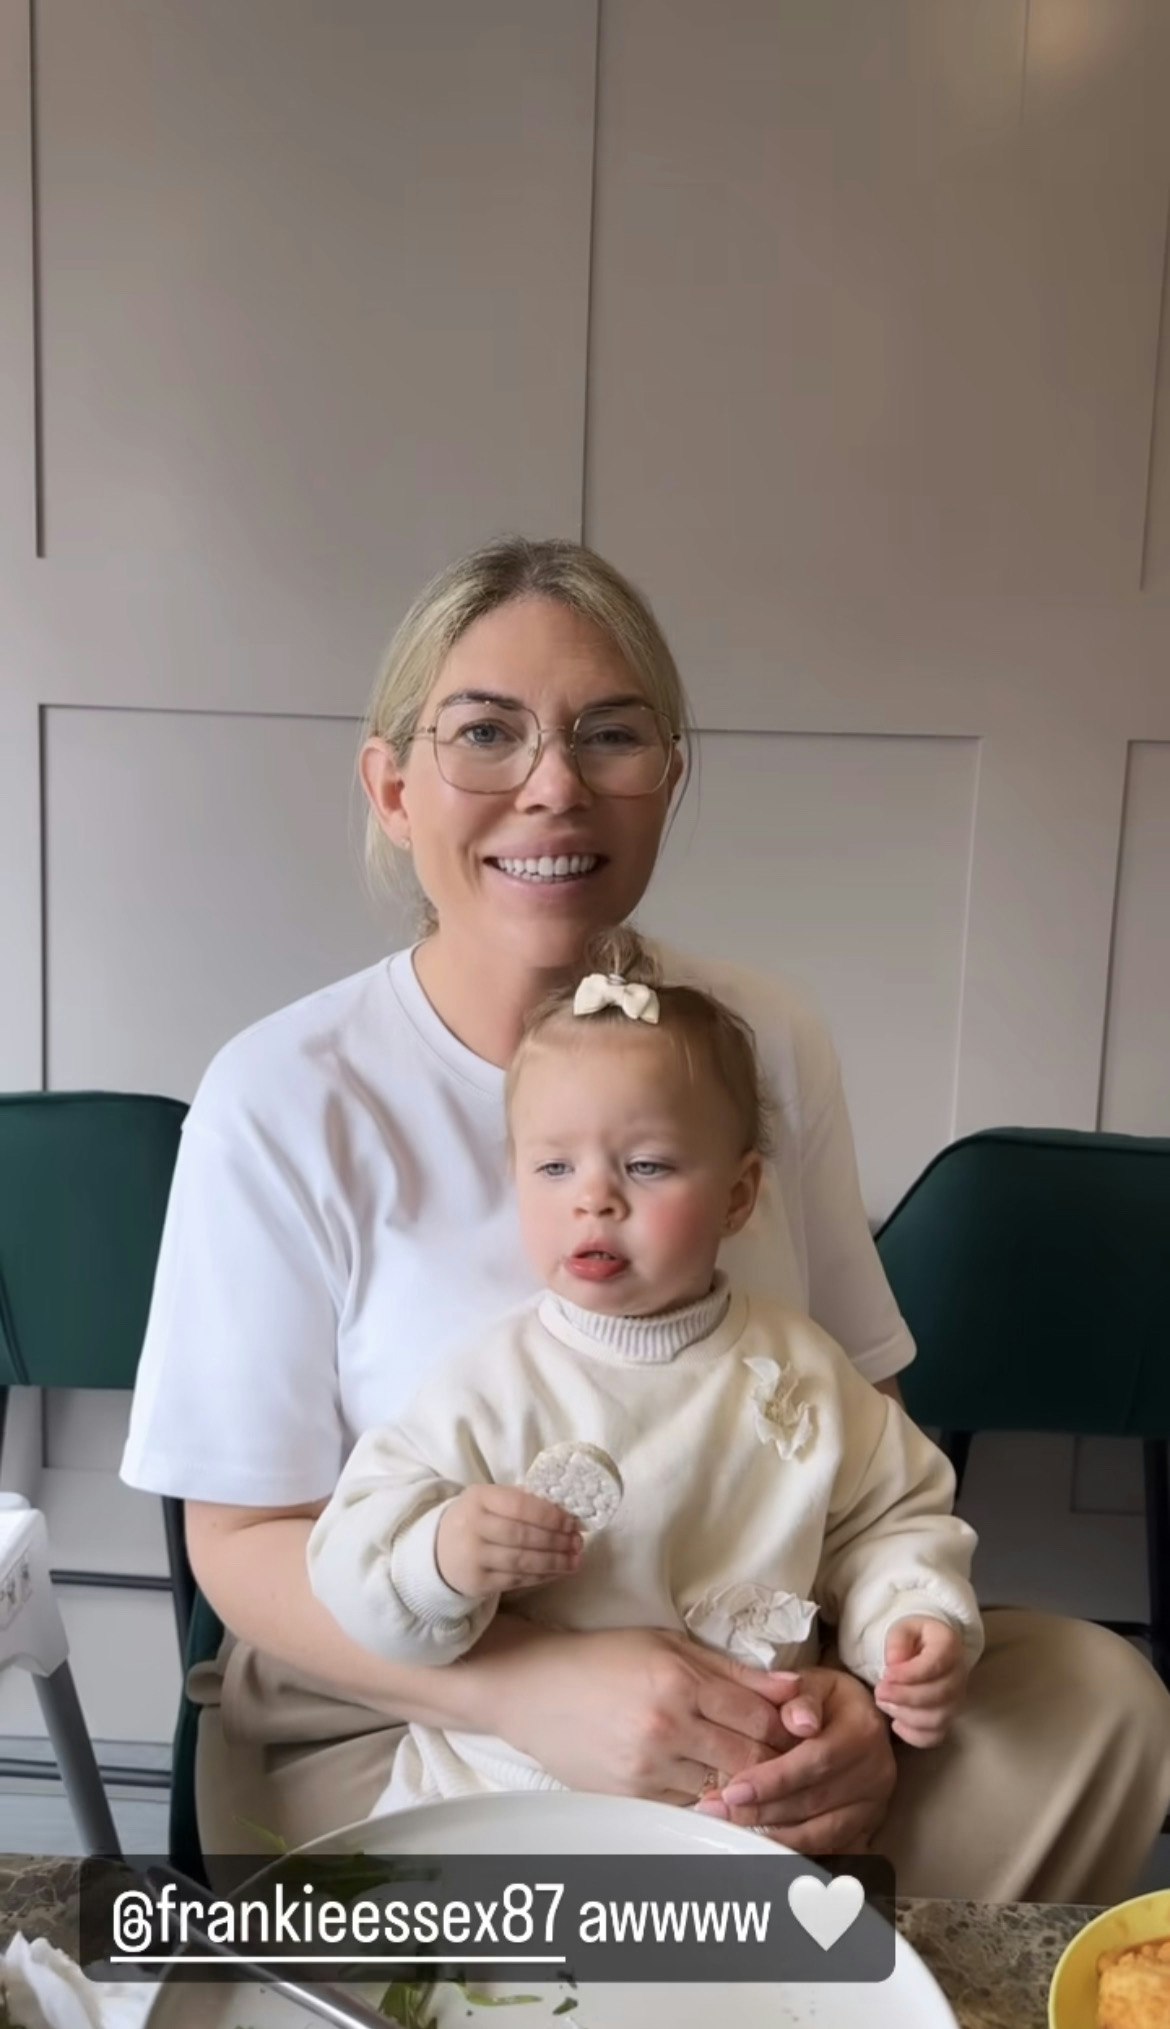 Frankie shared a snap of cousin Frankie Essex